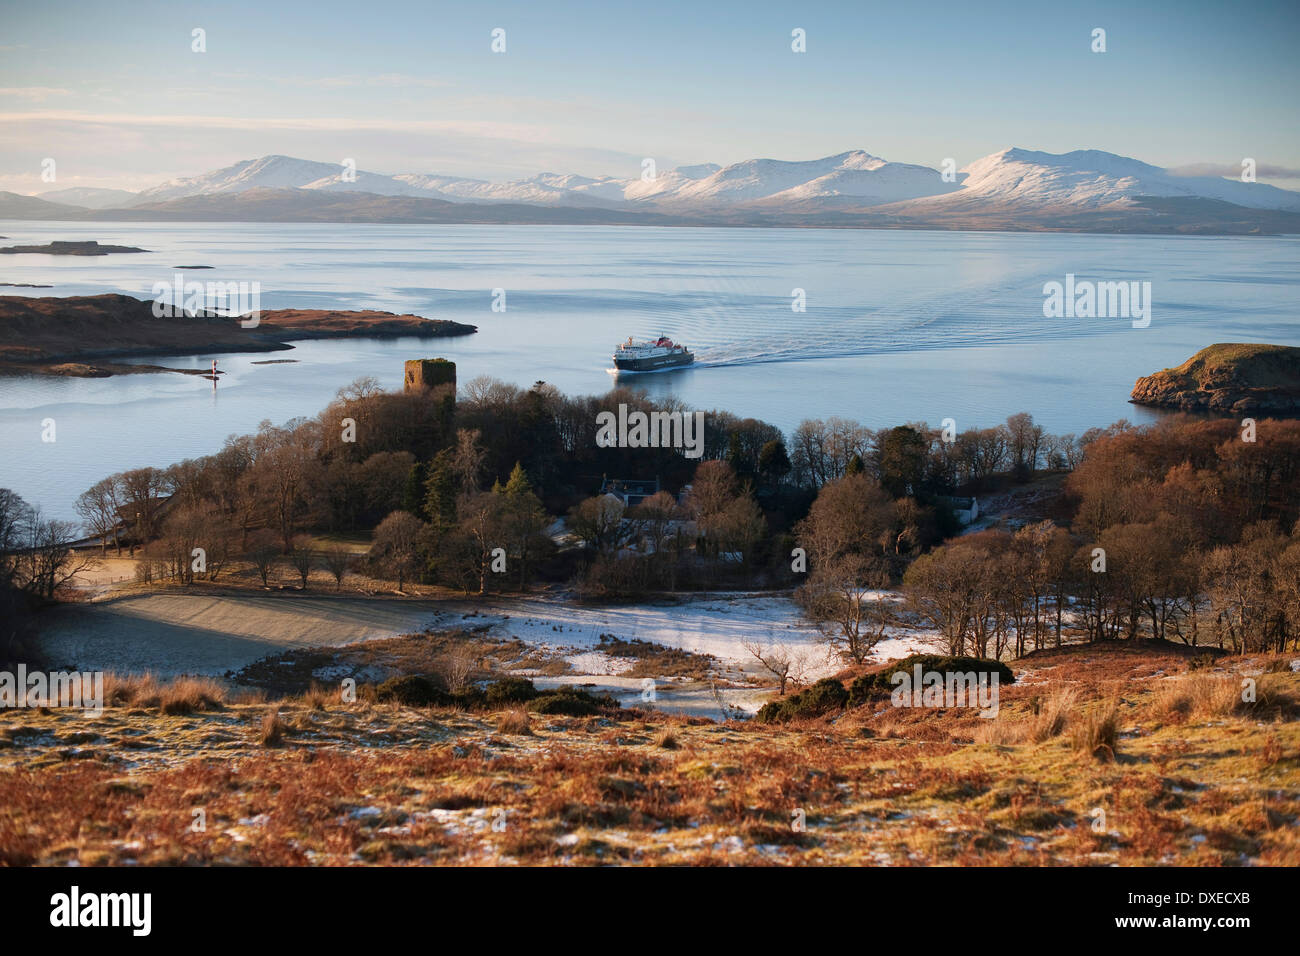 M.V.Clansman  approaches Oban bay with Dunollie Castle and Mull in view. Argyll Stock Photo